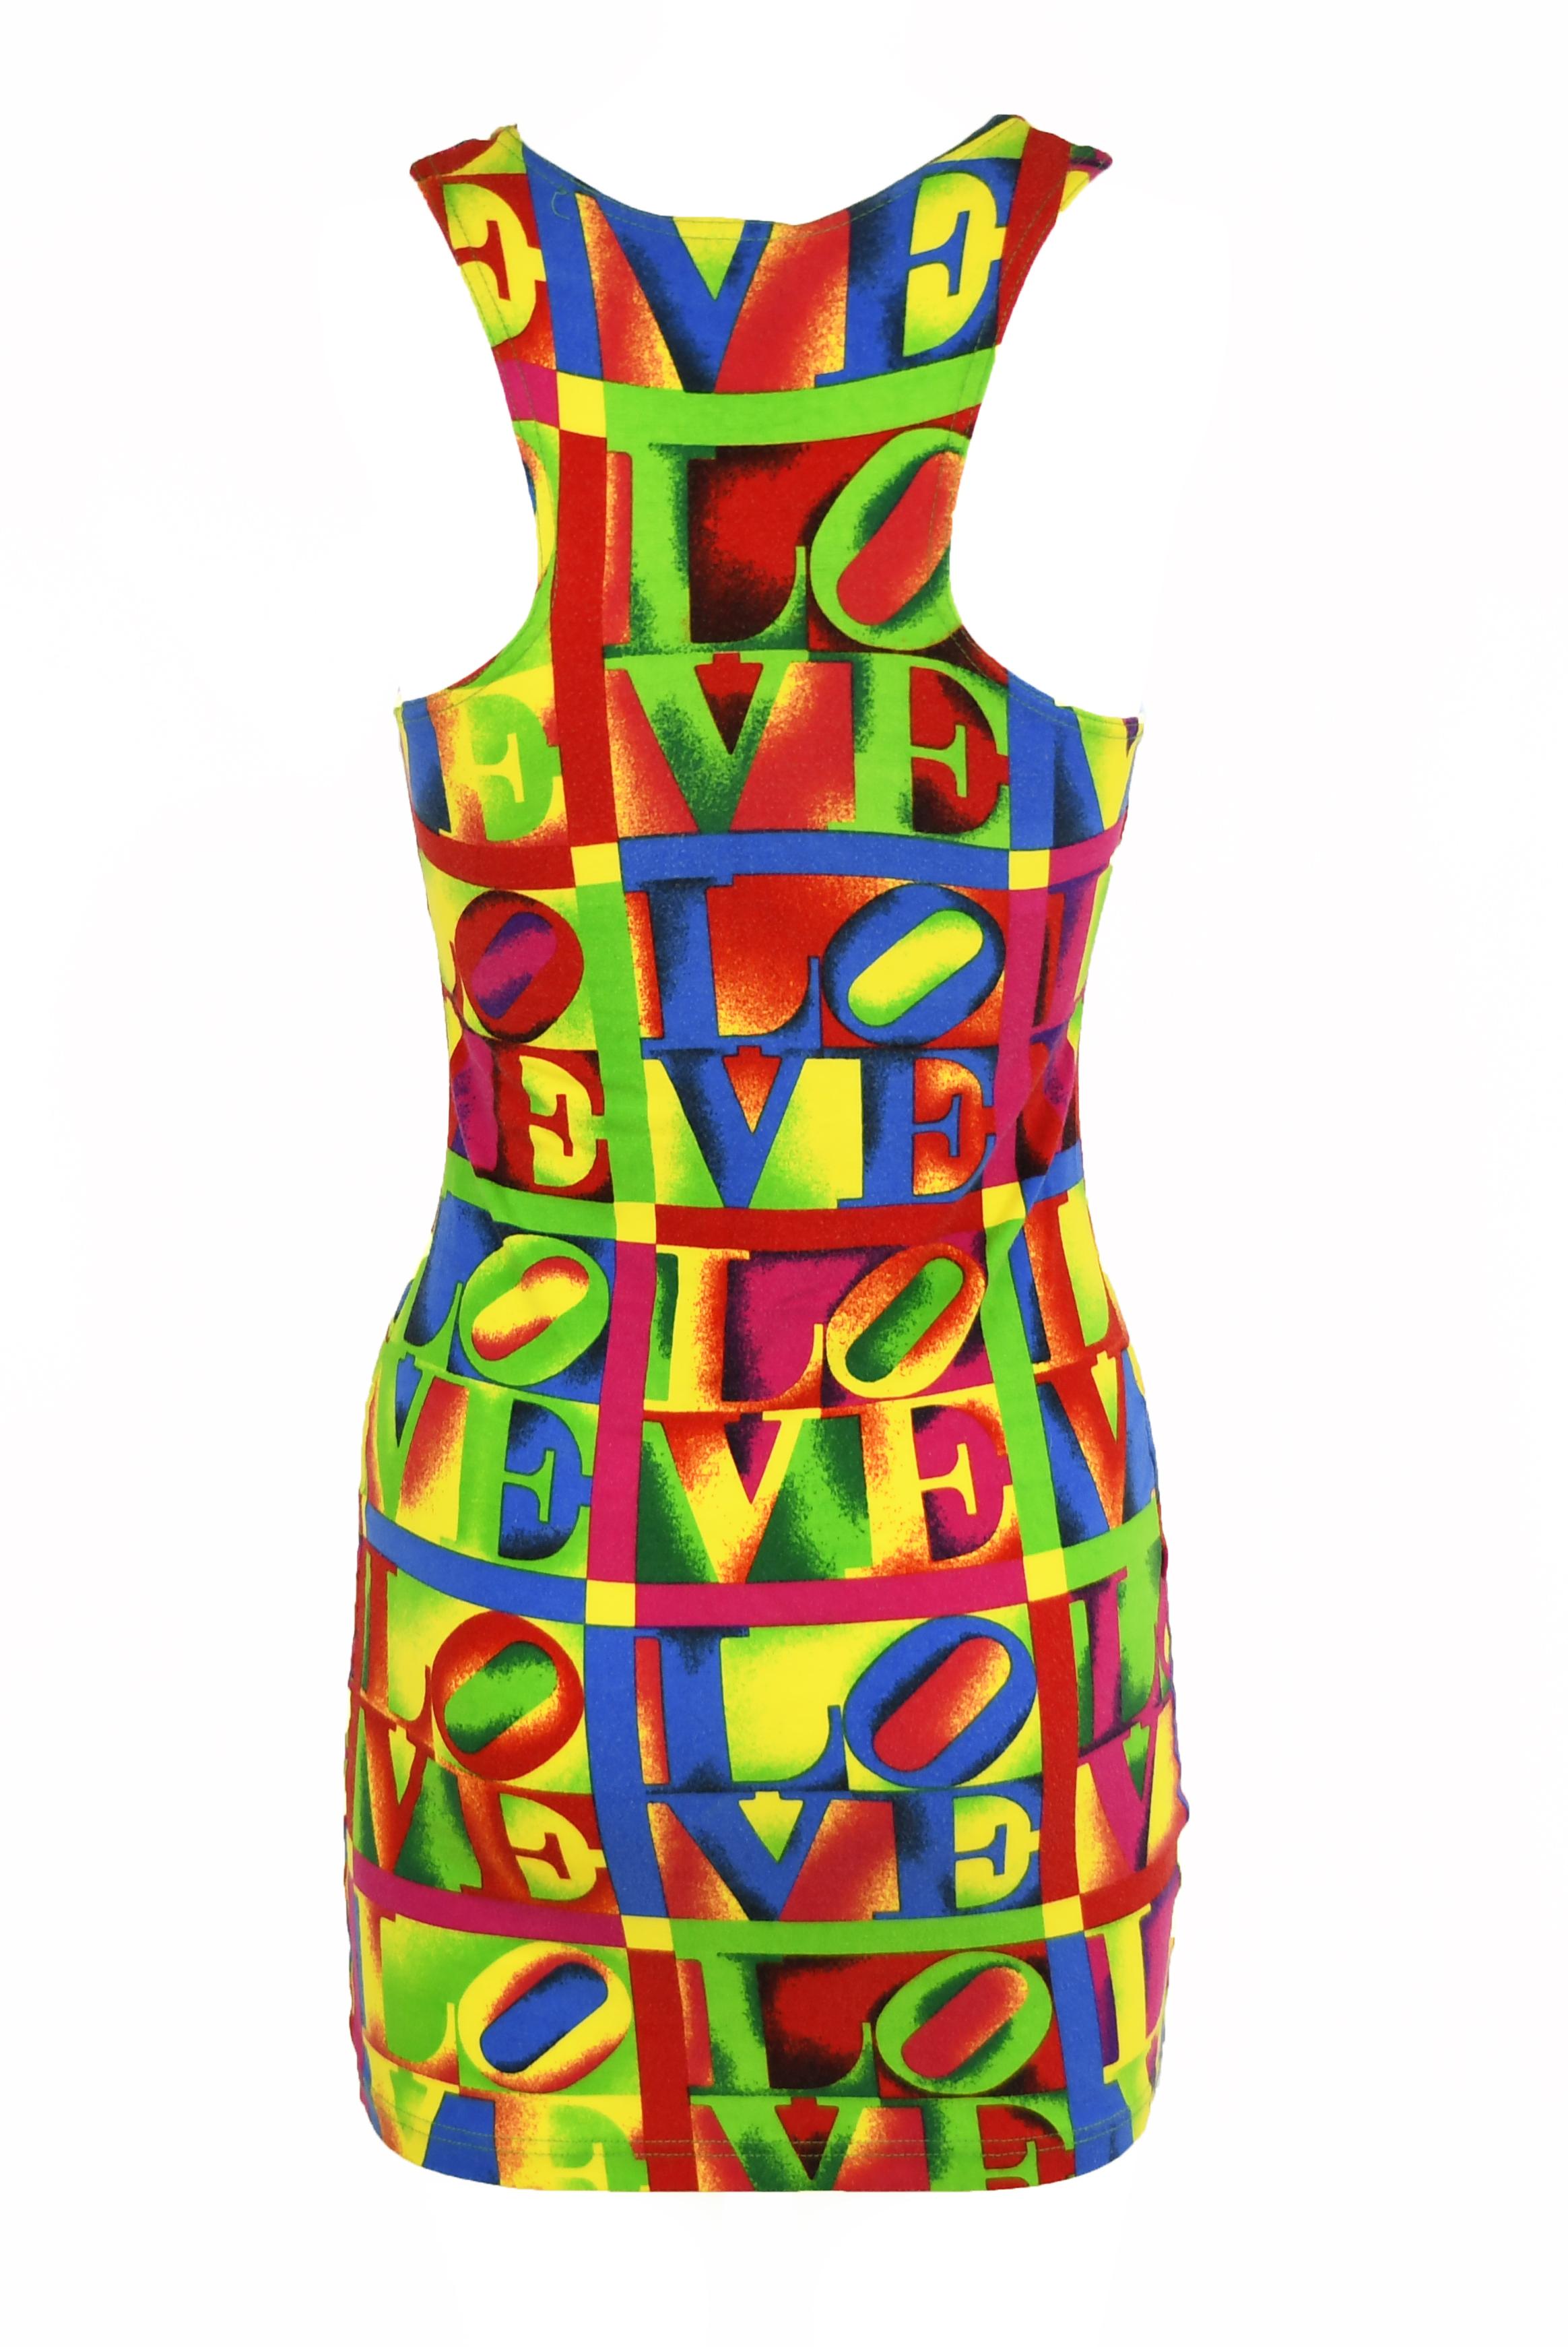 Rare vintage Versace jersey knit mini dress in bright multicolored LOVE print.  Racer back top and fitted silhouette in the coveted 90s LOVE pattern.  Highly collectible piece from Versace's 1995 S/S collection.

Size: IT 44, could fit smaller sizes